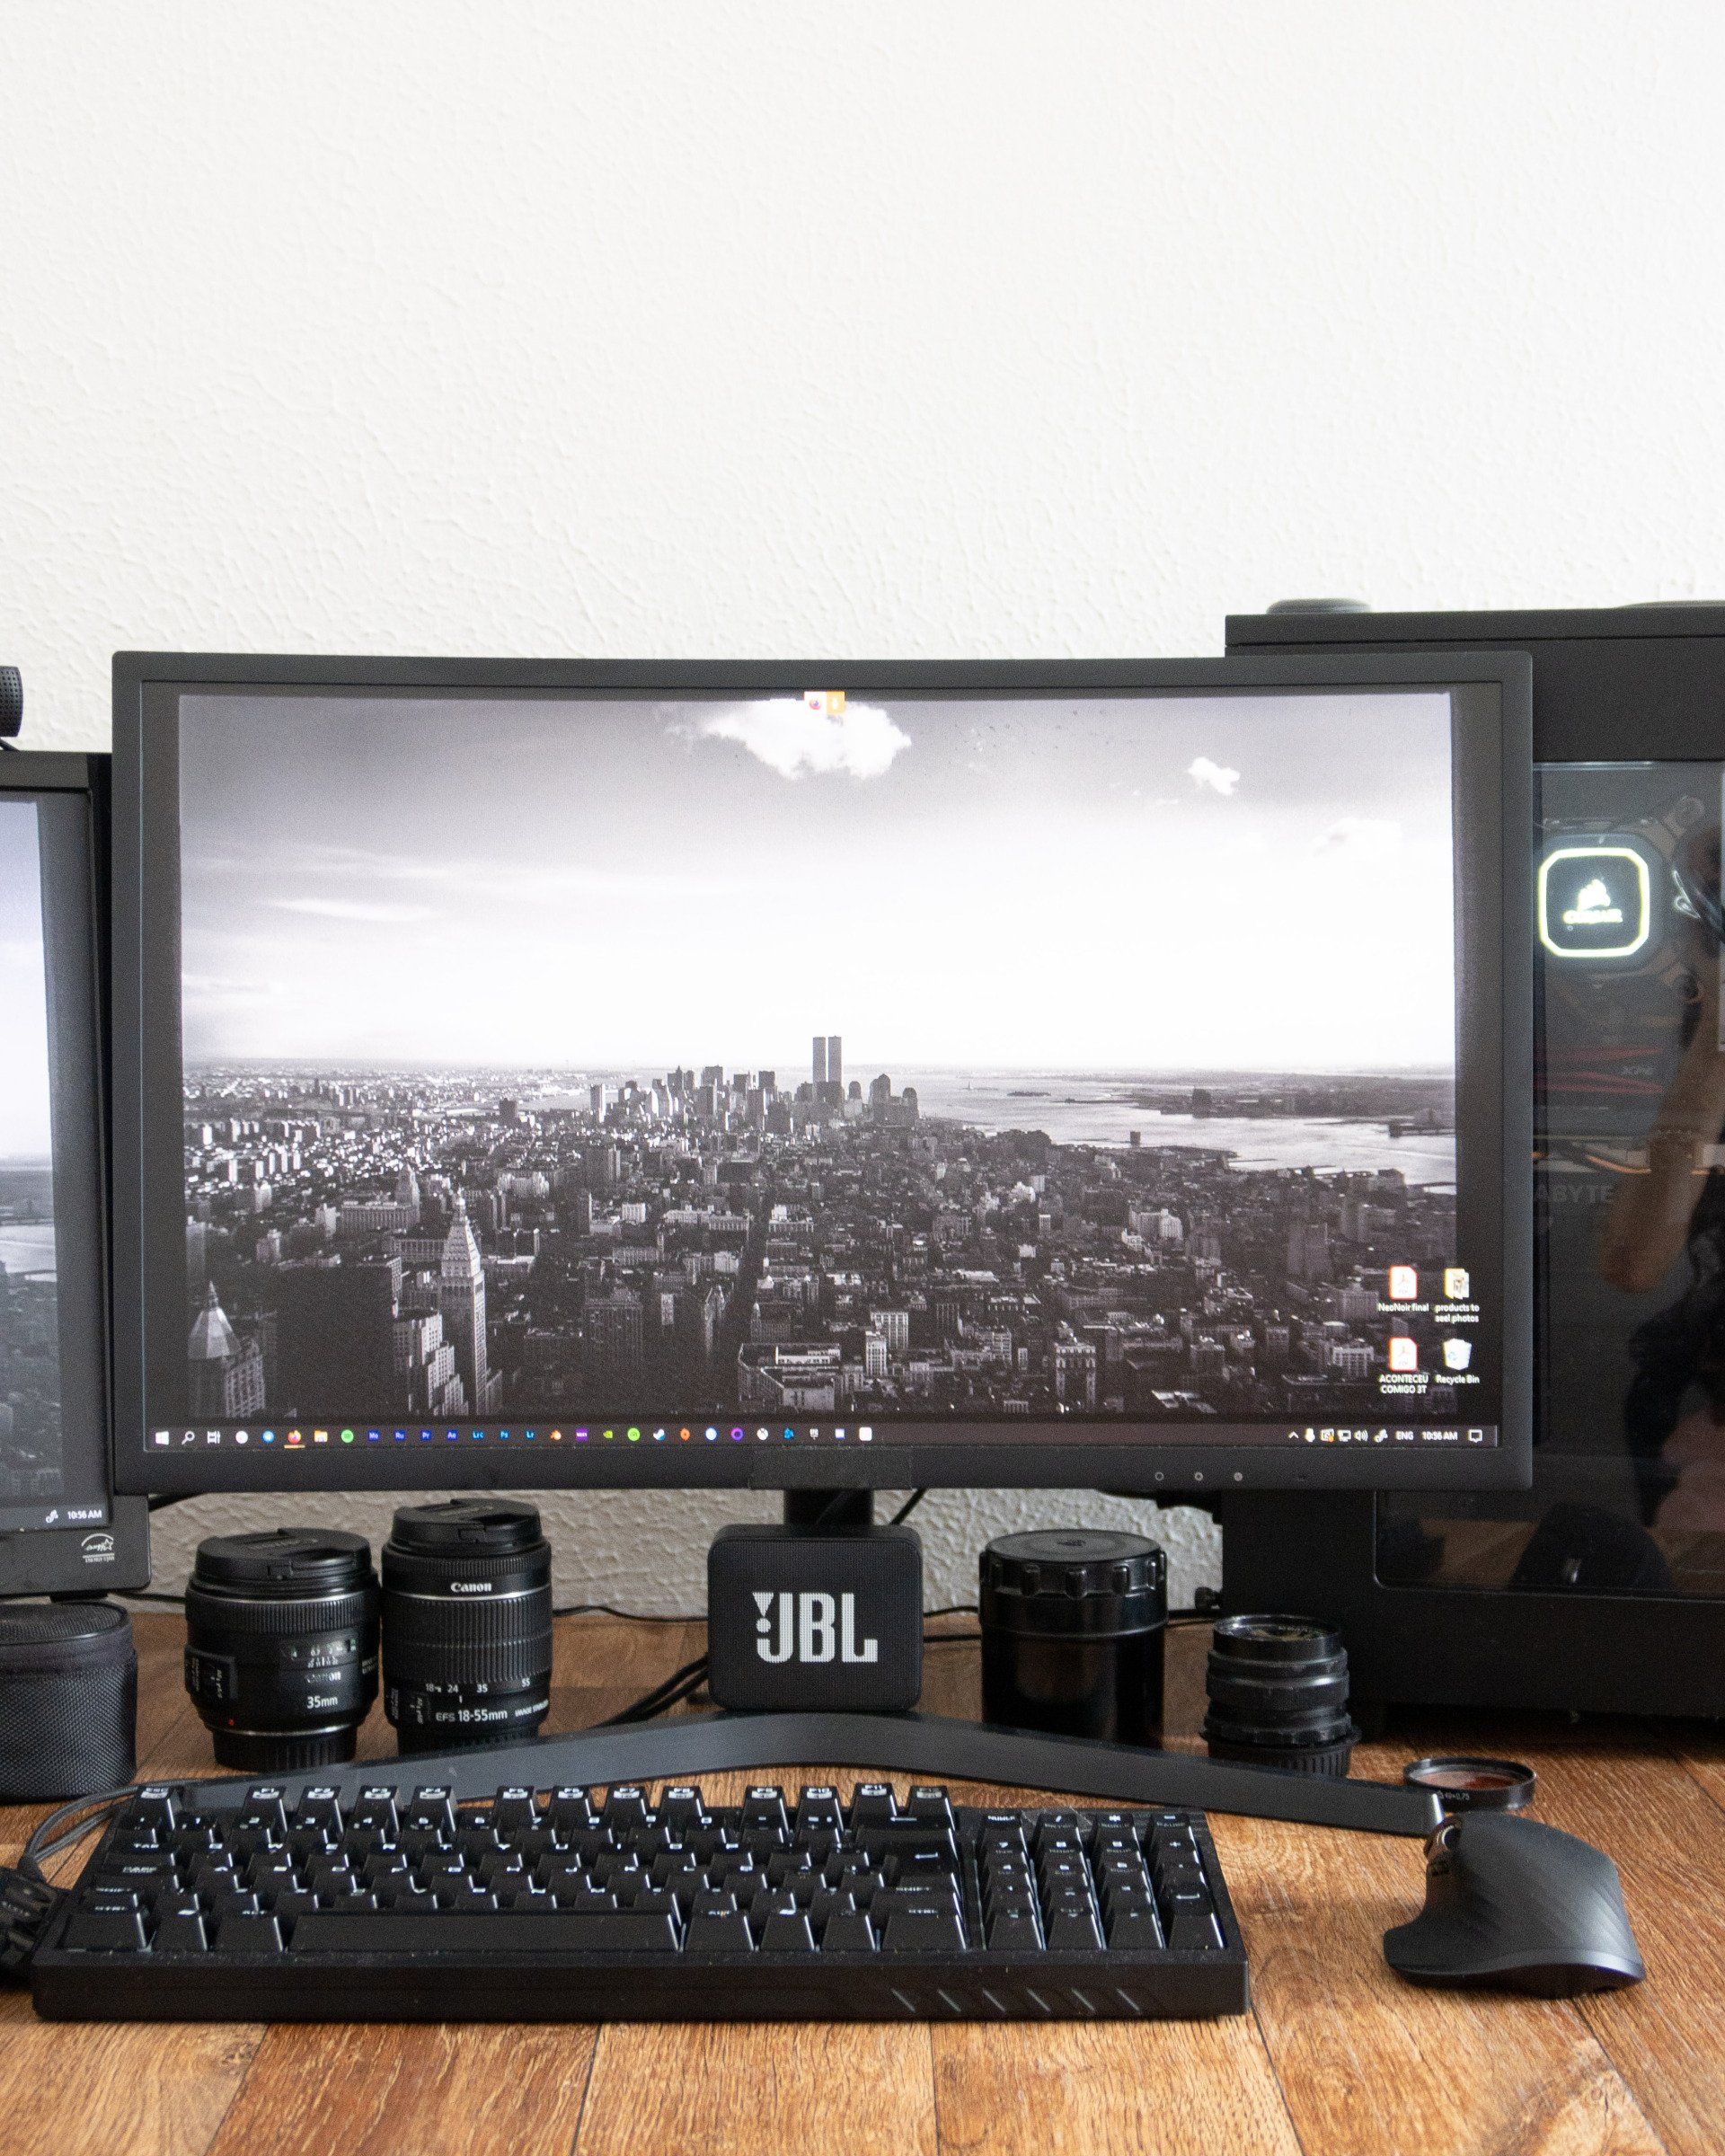 Picture of a desktop PC with a black and grey city skyline